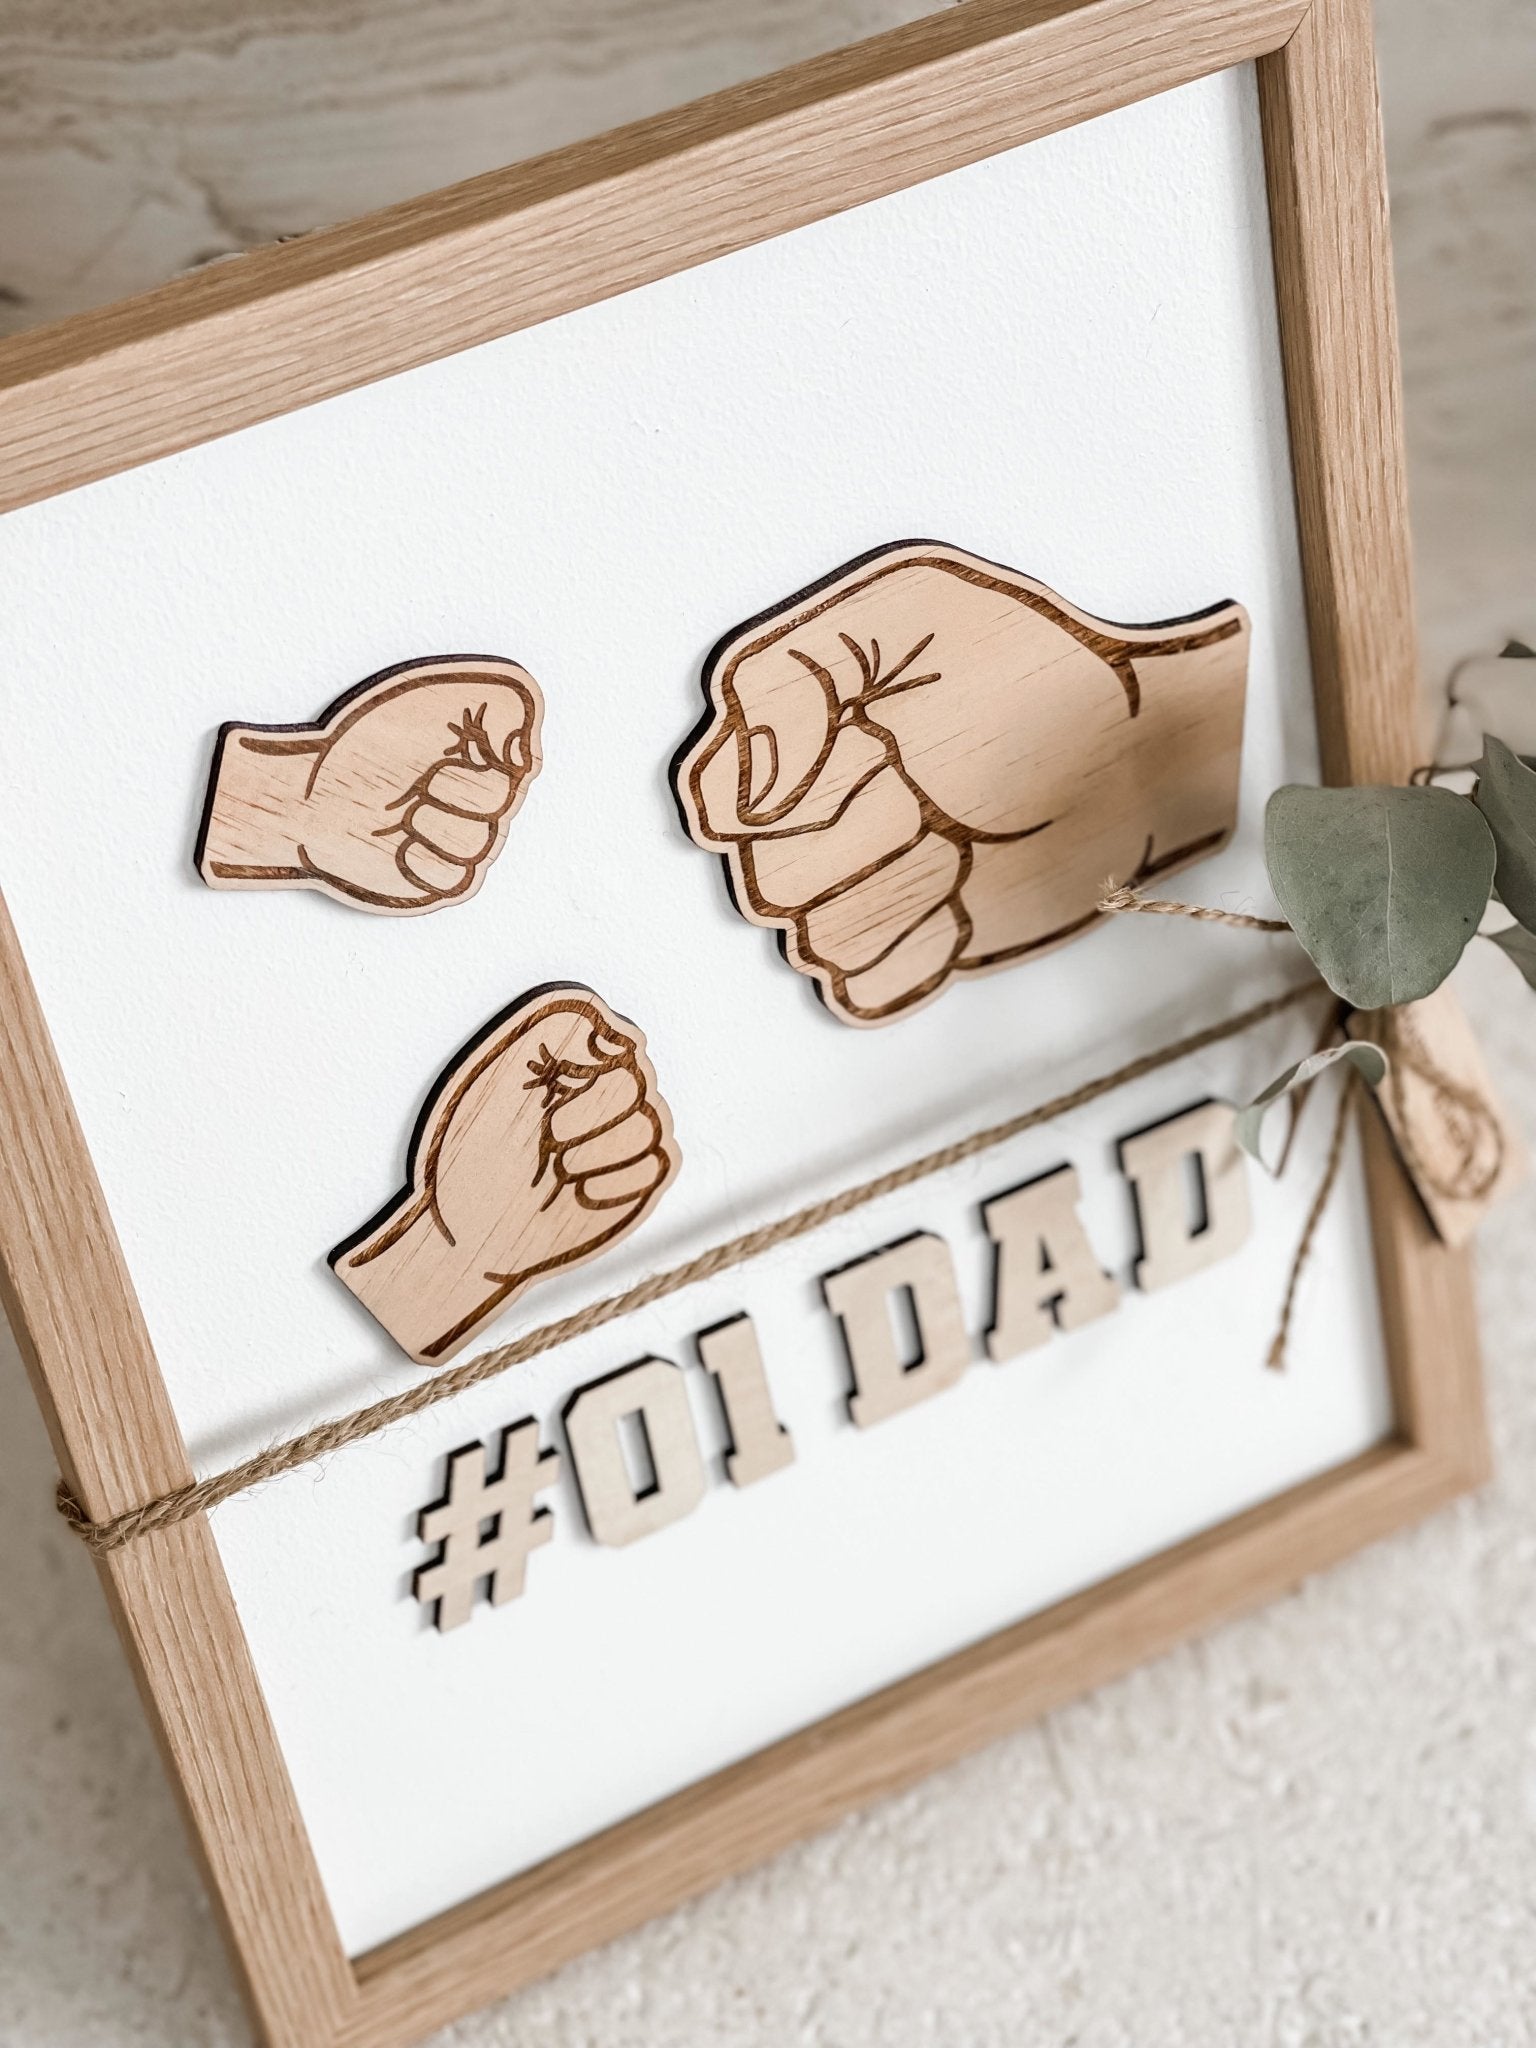 Fist Pump Photo Frame - The Humble Gift Co.